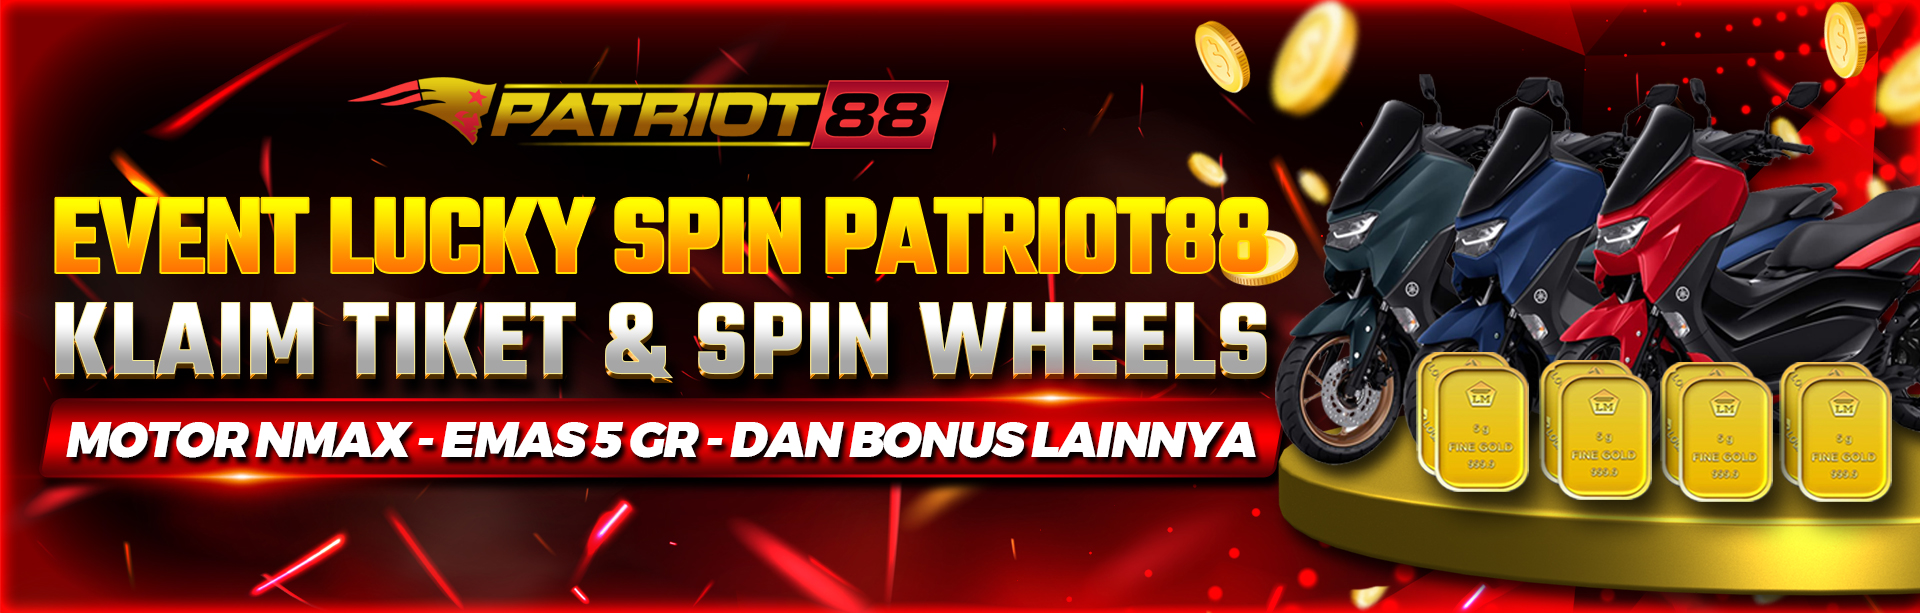 EVENT LUCKY SPIN PATRIOT88